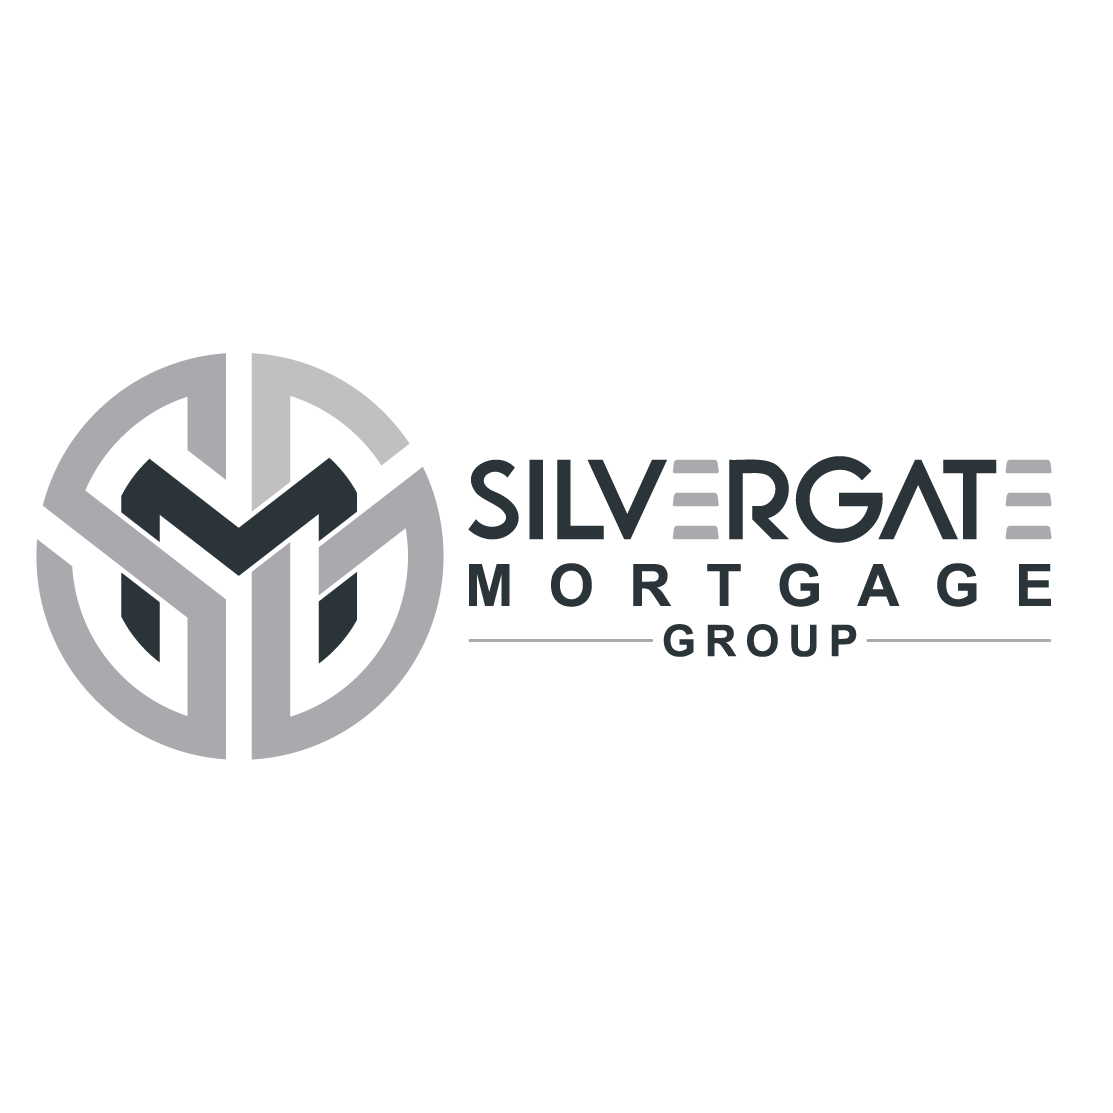 Neal Kinder - Silvergate Mortgage Group - Redding, CA 96002 - (530)209-3865 | ShowMeLocal.com